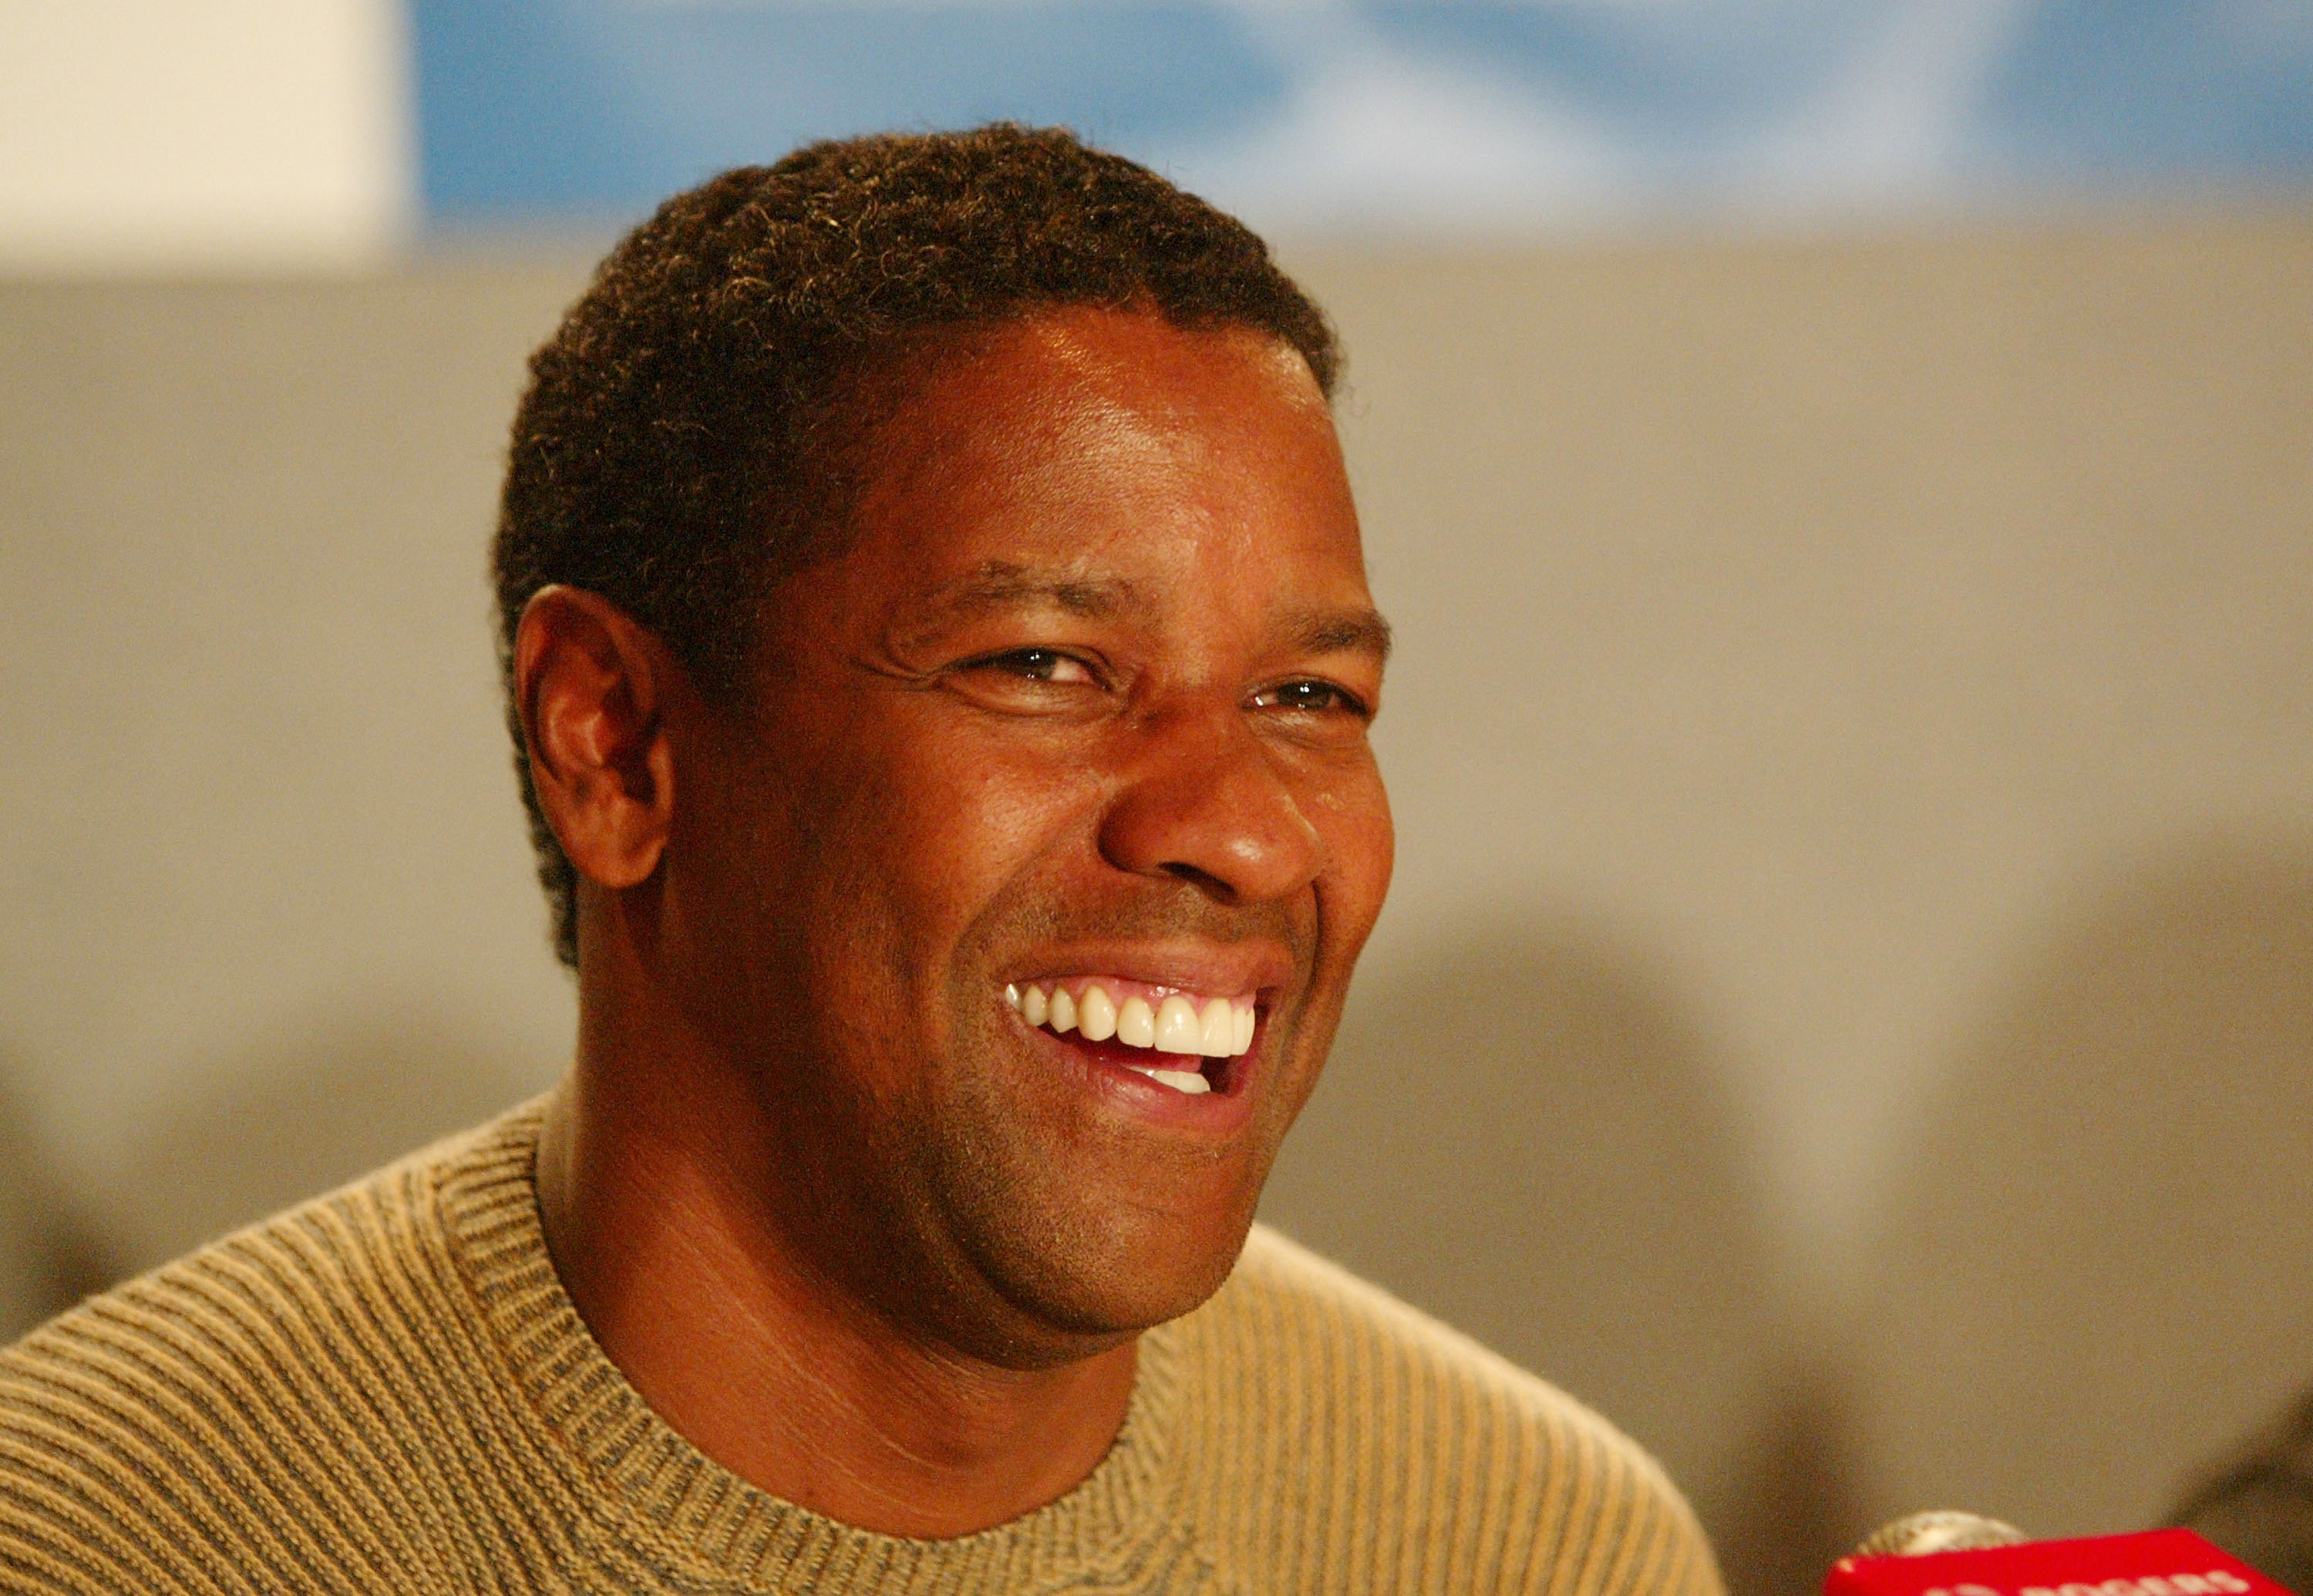 Denzel Washington participates in the "Out Of Time" press conference during the 2003 Toronto International Film Festival at the Delta Chelsea Hotel September 7, 2003 in Toronto, Canada. | Source: Getty Images